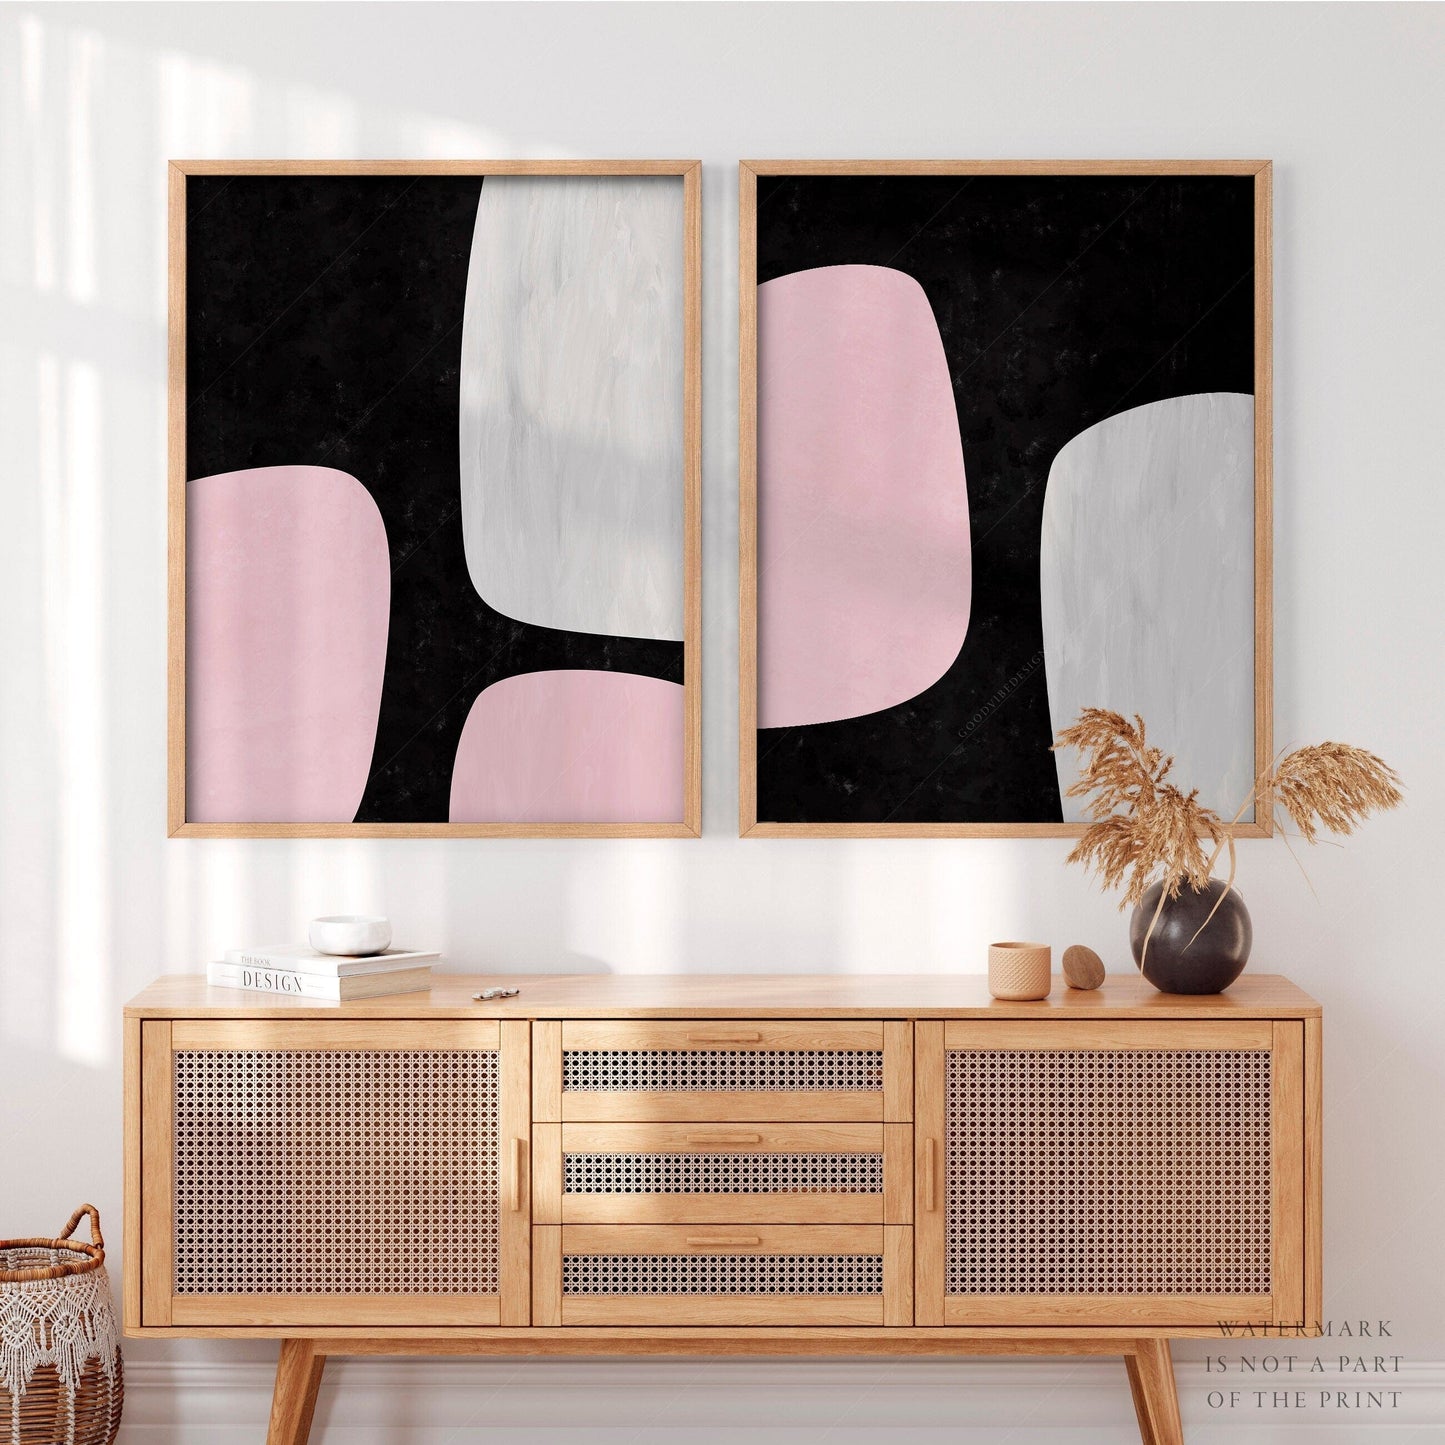 Home Poster Decor Set of 2 Modern Abstract Print, Black Minimalist, Set of 2 Art, Mid Century Modern, Pink Gray Color, Aesthetic Decor, Pastel Tones, Gallery Wall 12